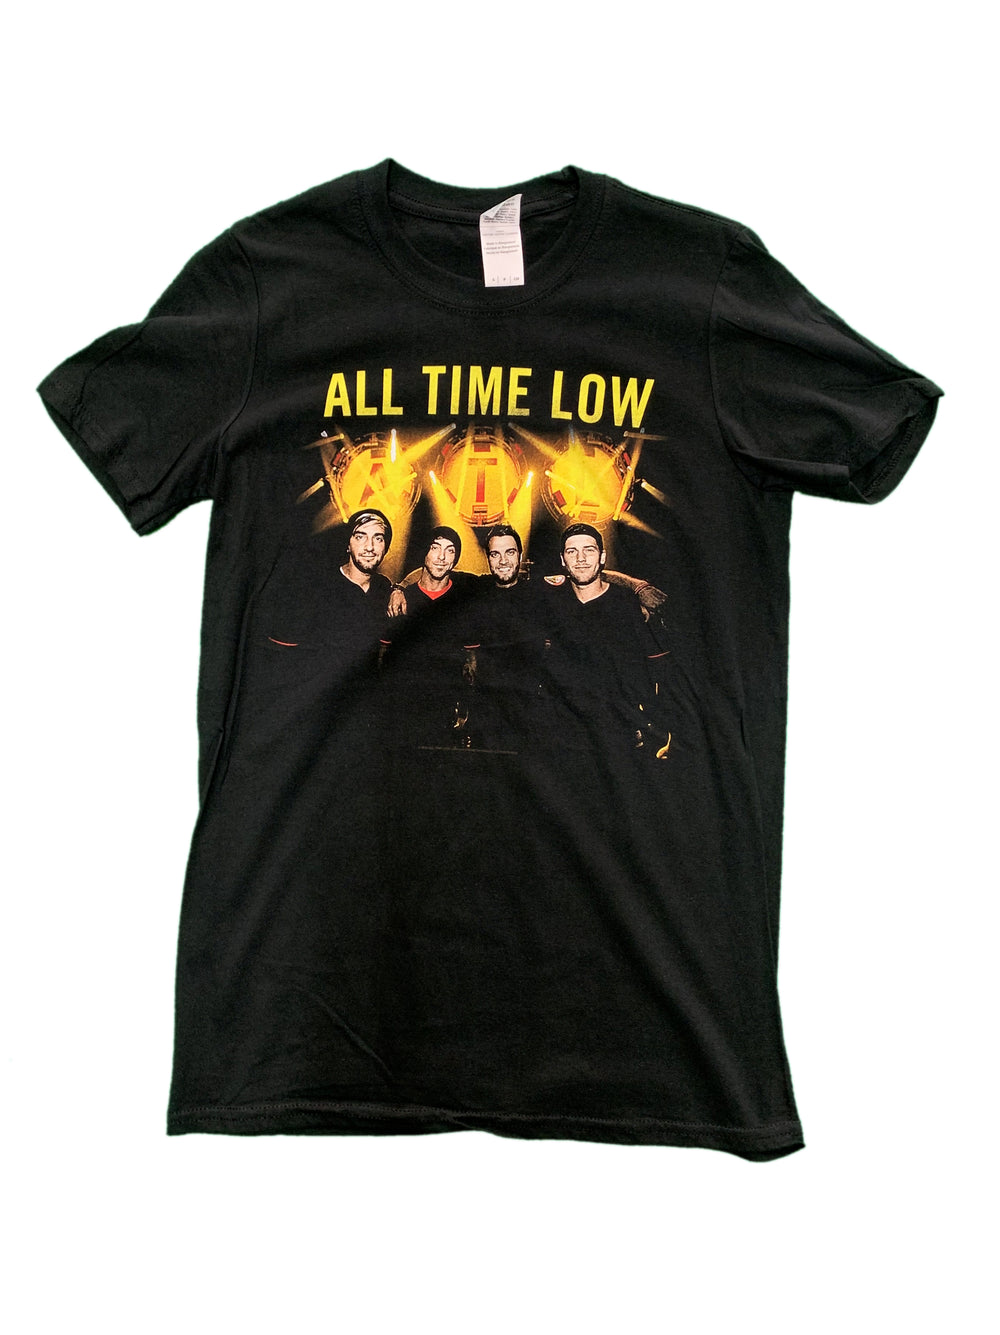 All Time Low Goodnight Unisex Official Tee Shirt Brand New Various Sizes